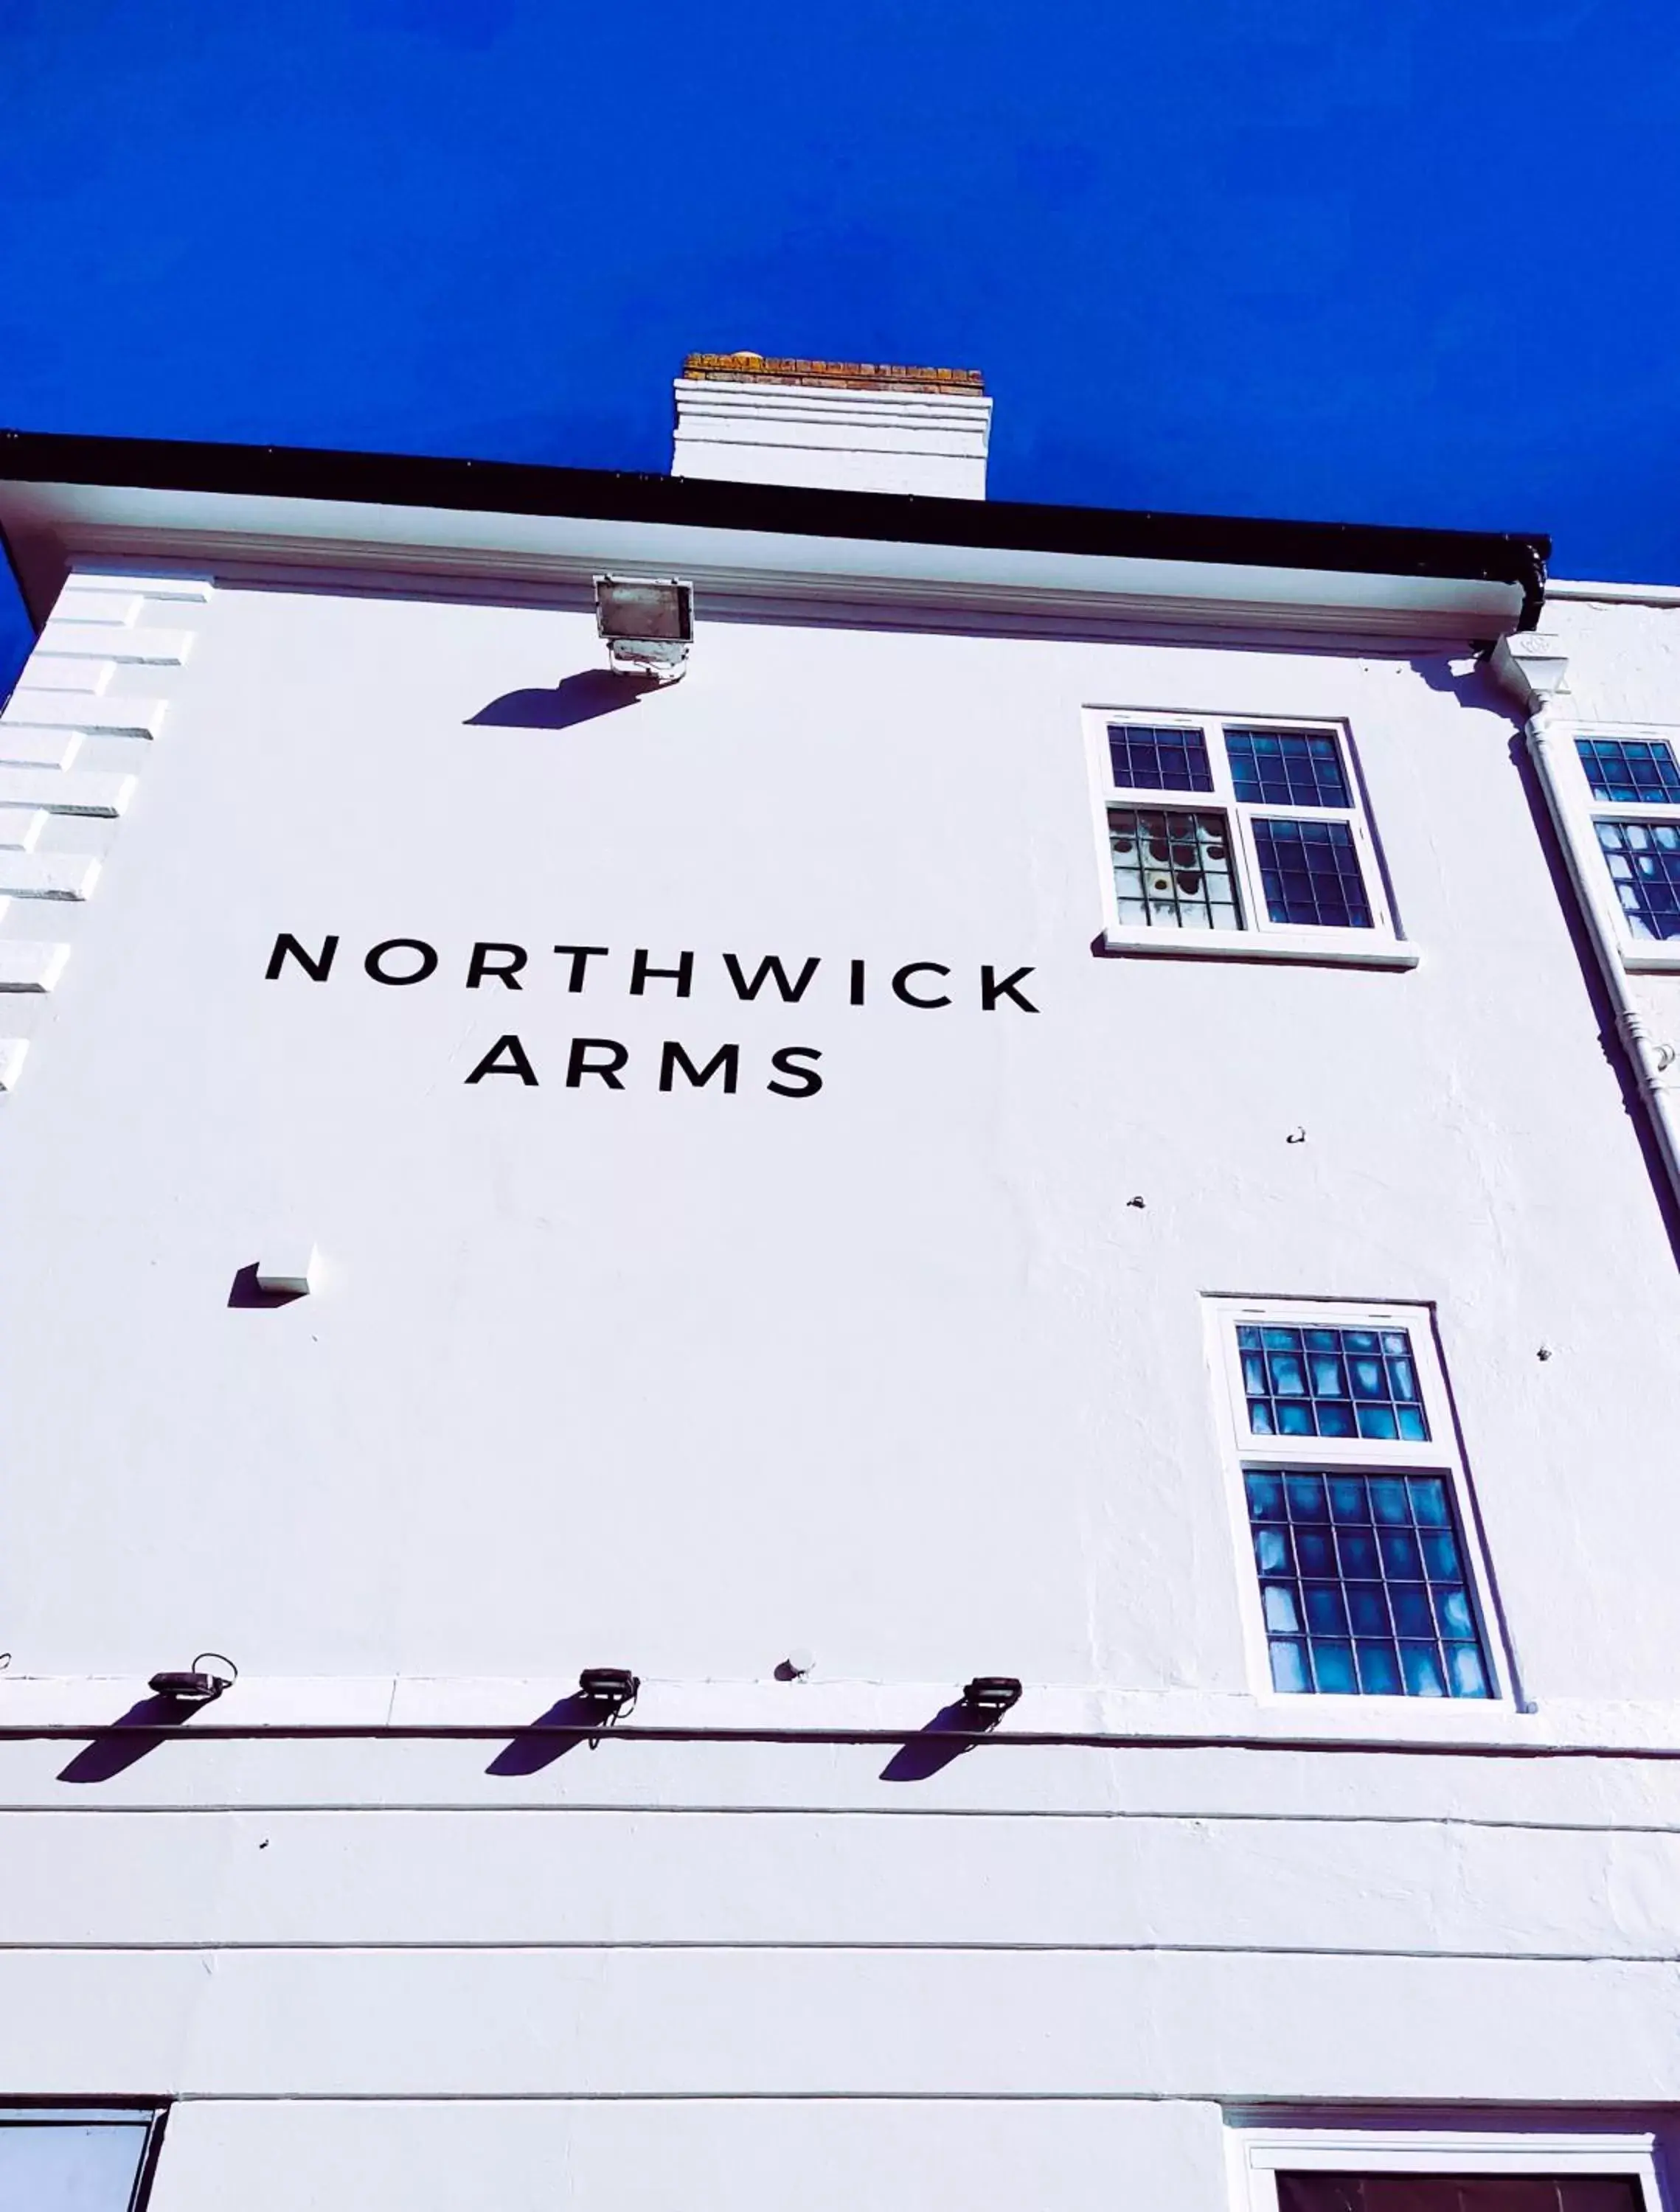 Property building in The Northwick Arms Hotel